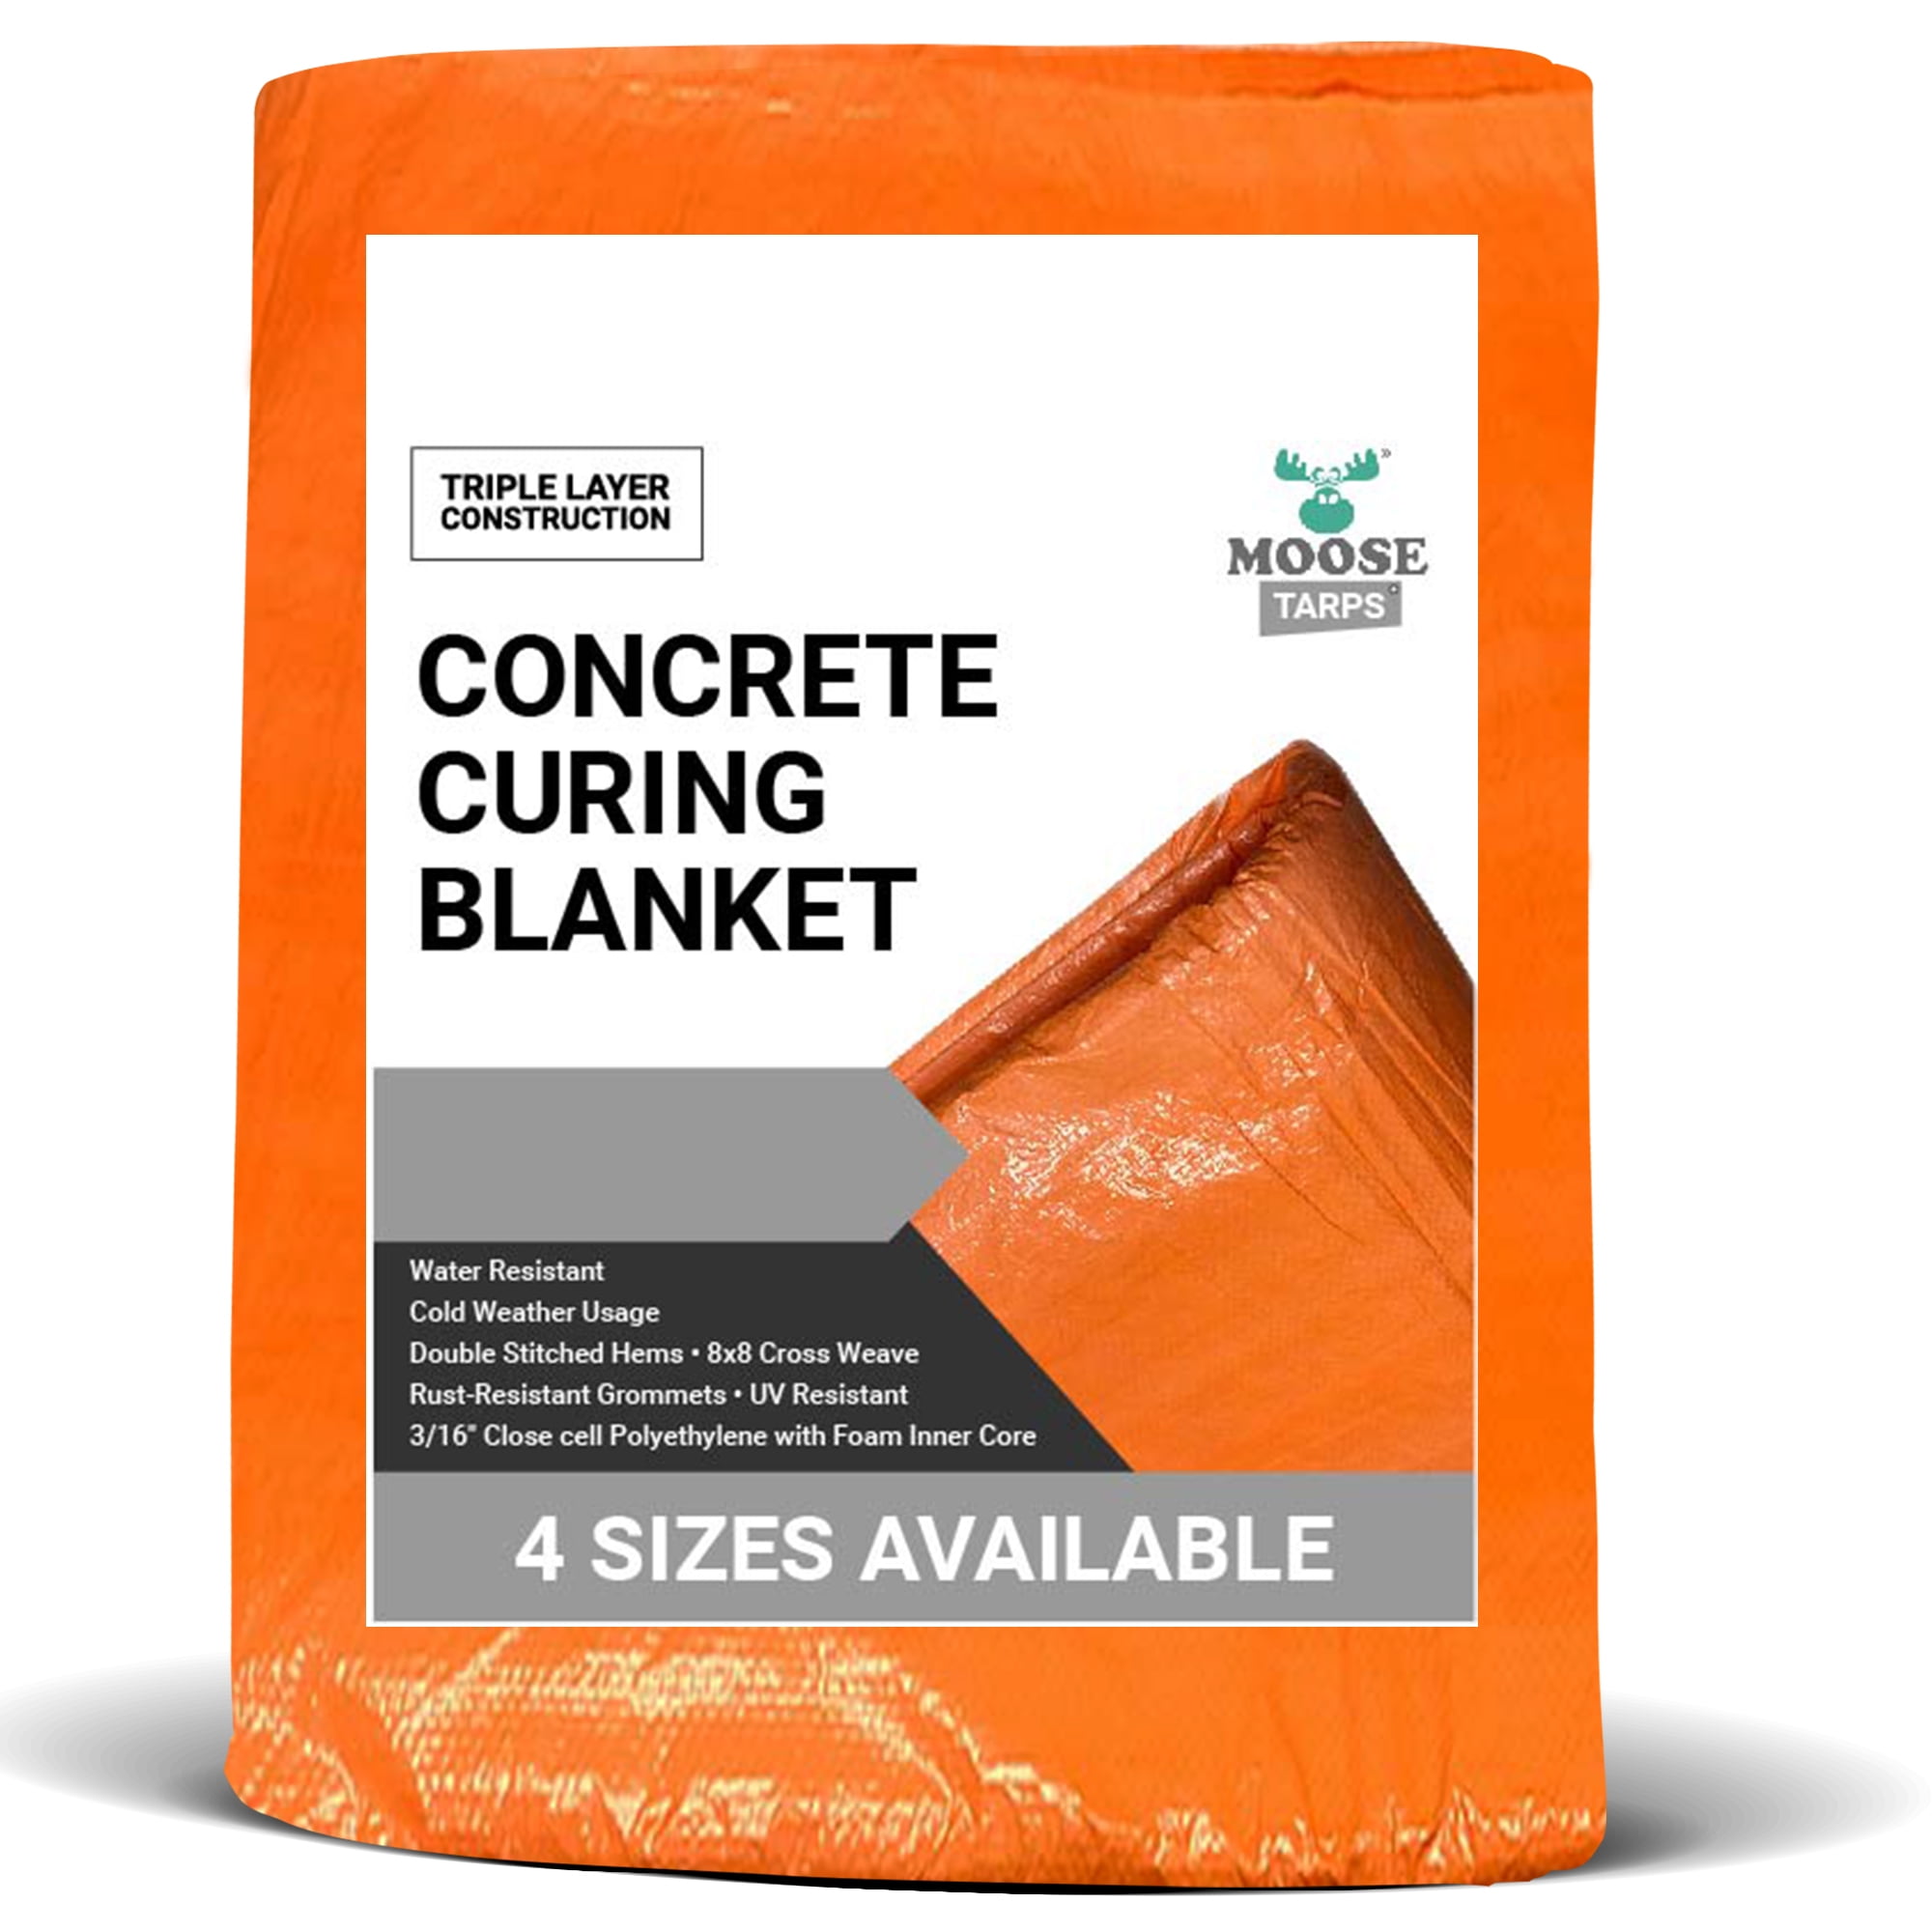 How To Use Concrete Blankets, Concrete Curing Blanket